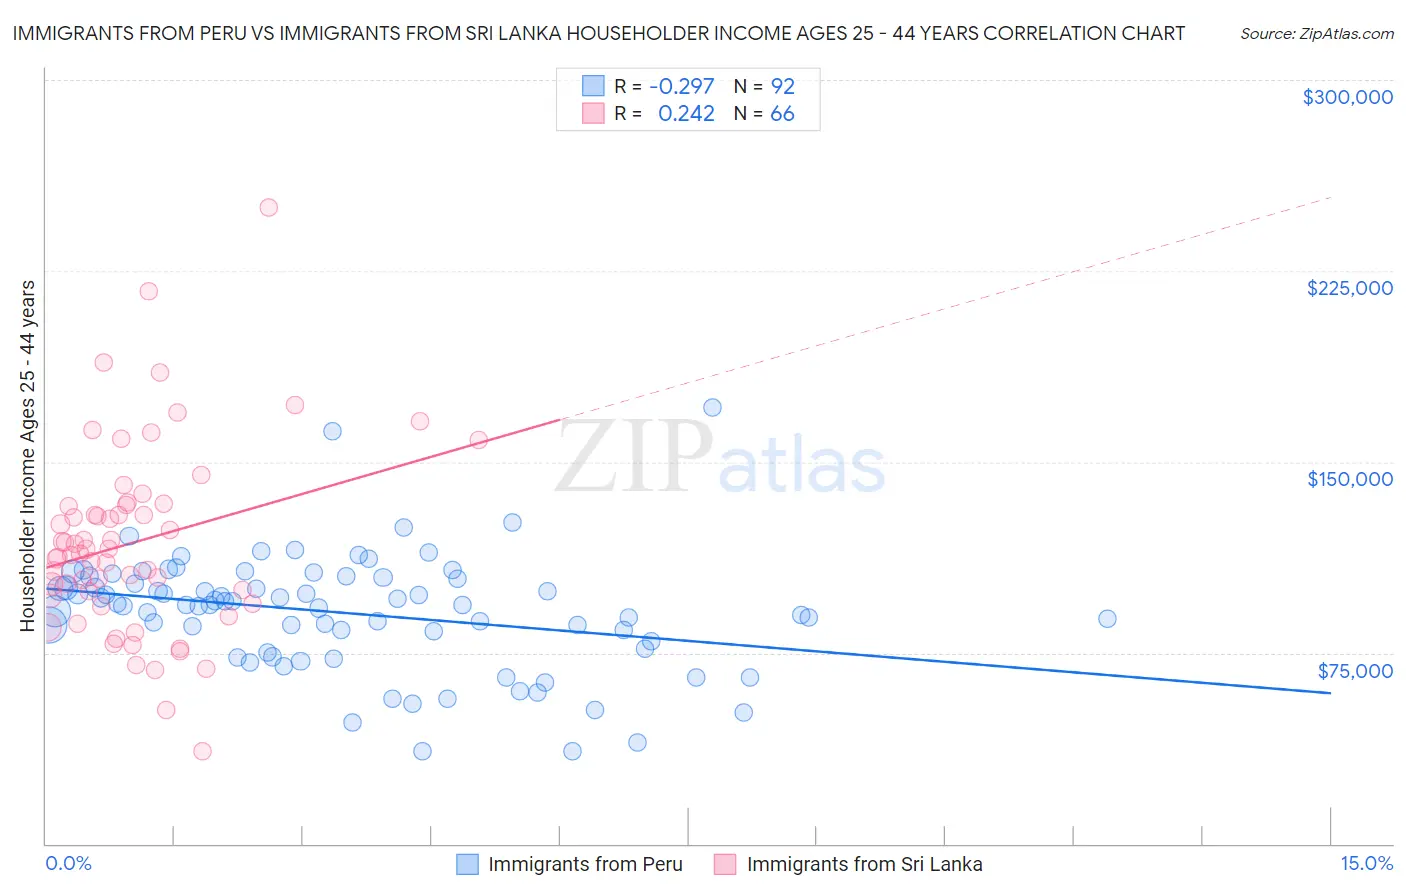 Immigrants from Peru vs Immigrants from Sri Lanka Householder Income Ages 25 - 44 years